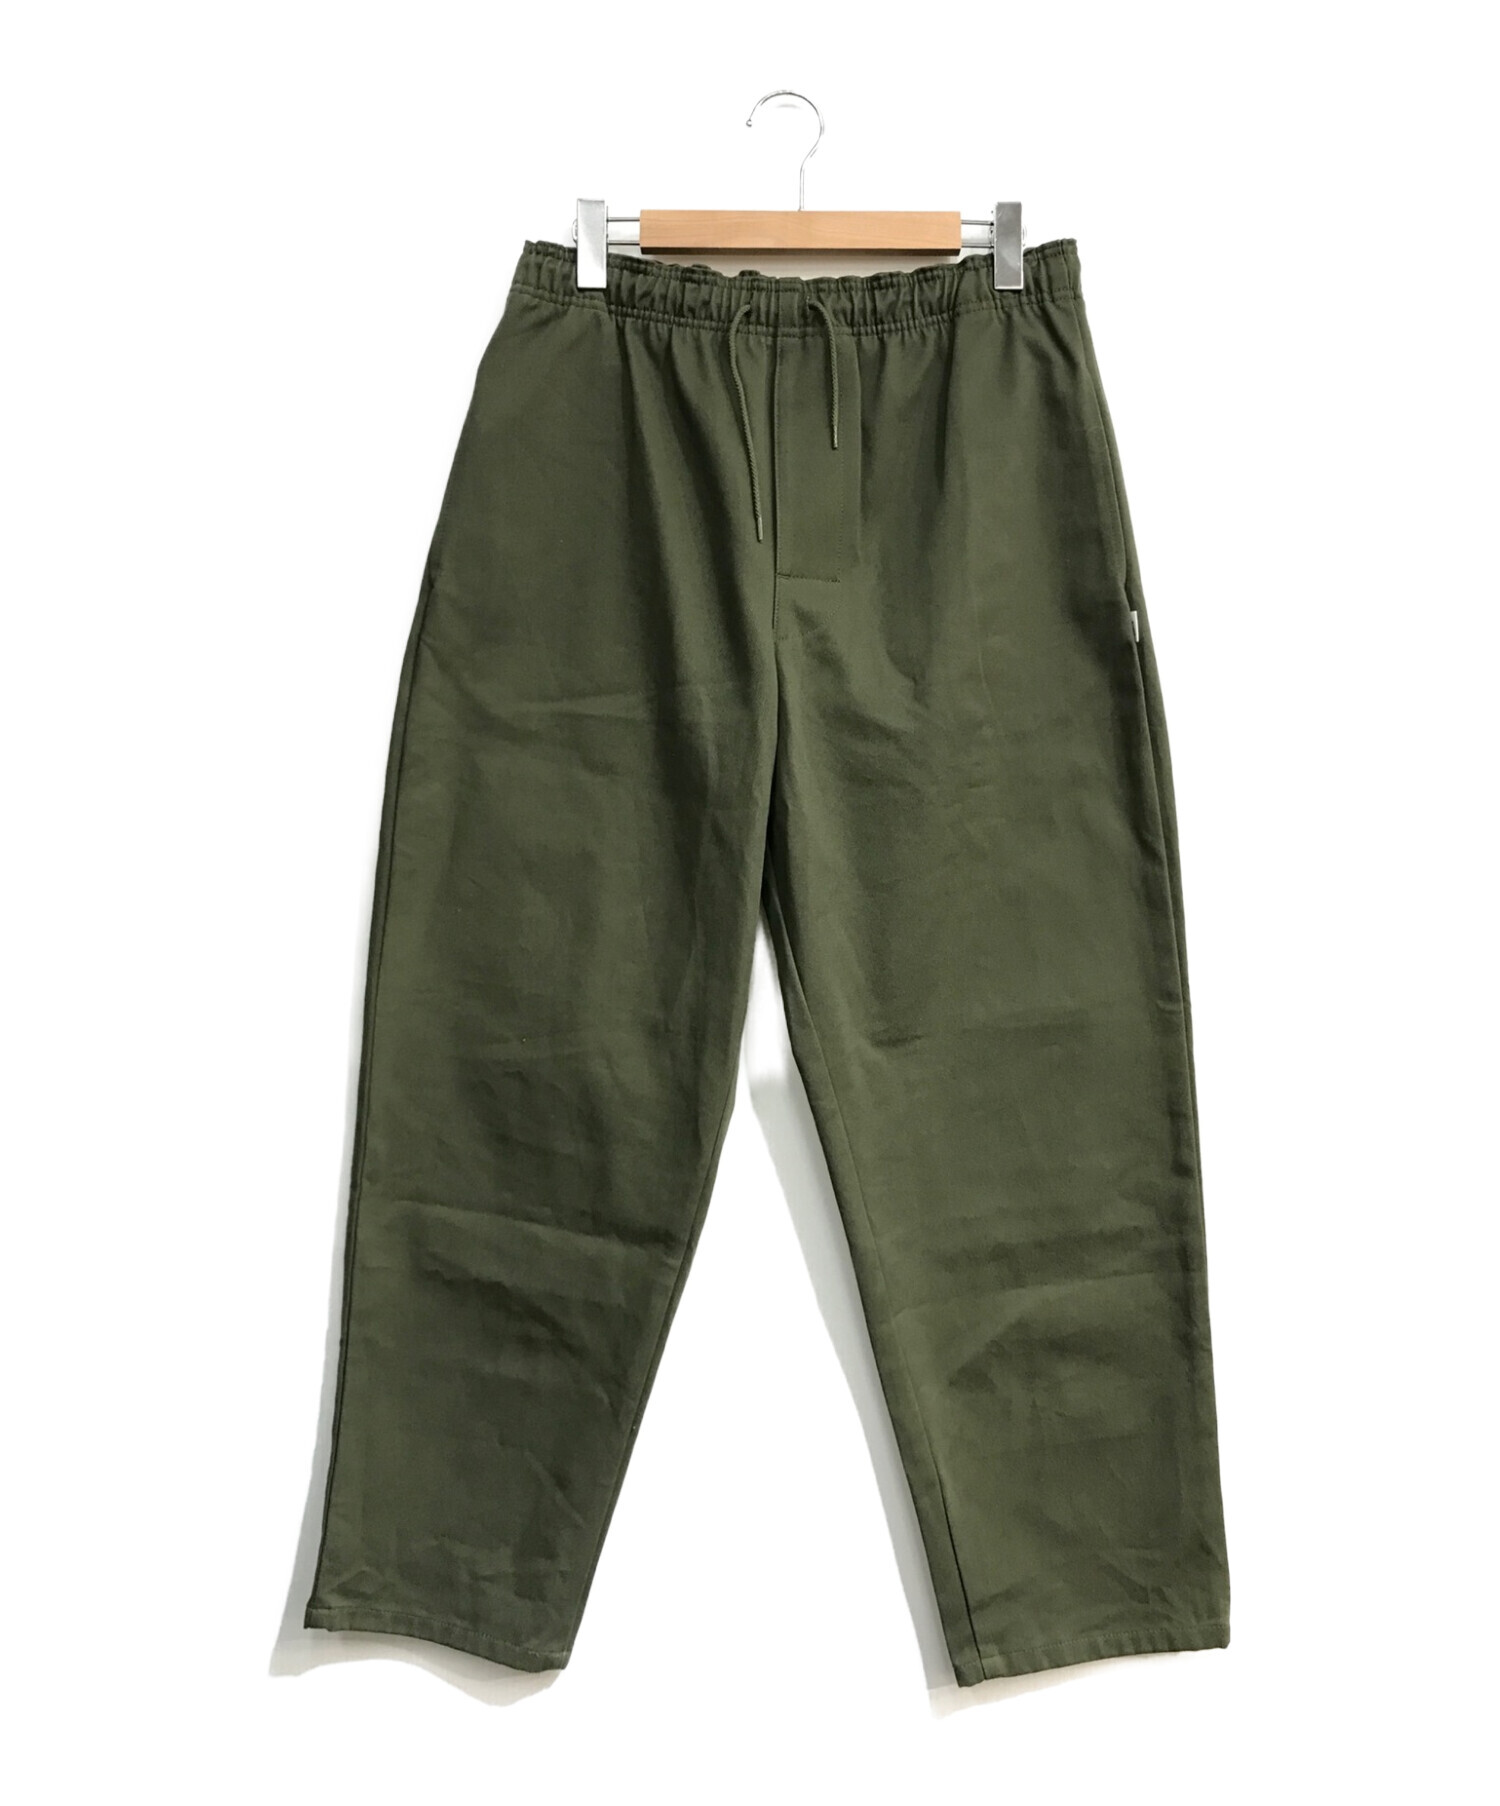 WTAPS (ダブルタップス) SEAGULL 03 TROUSERS COTTON TWILL　212WVDT-PTM08 カーキ サイズ:03